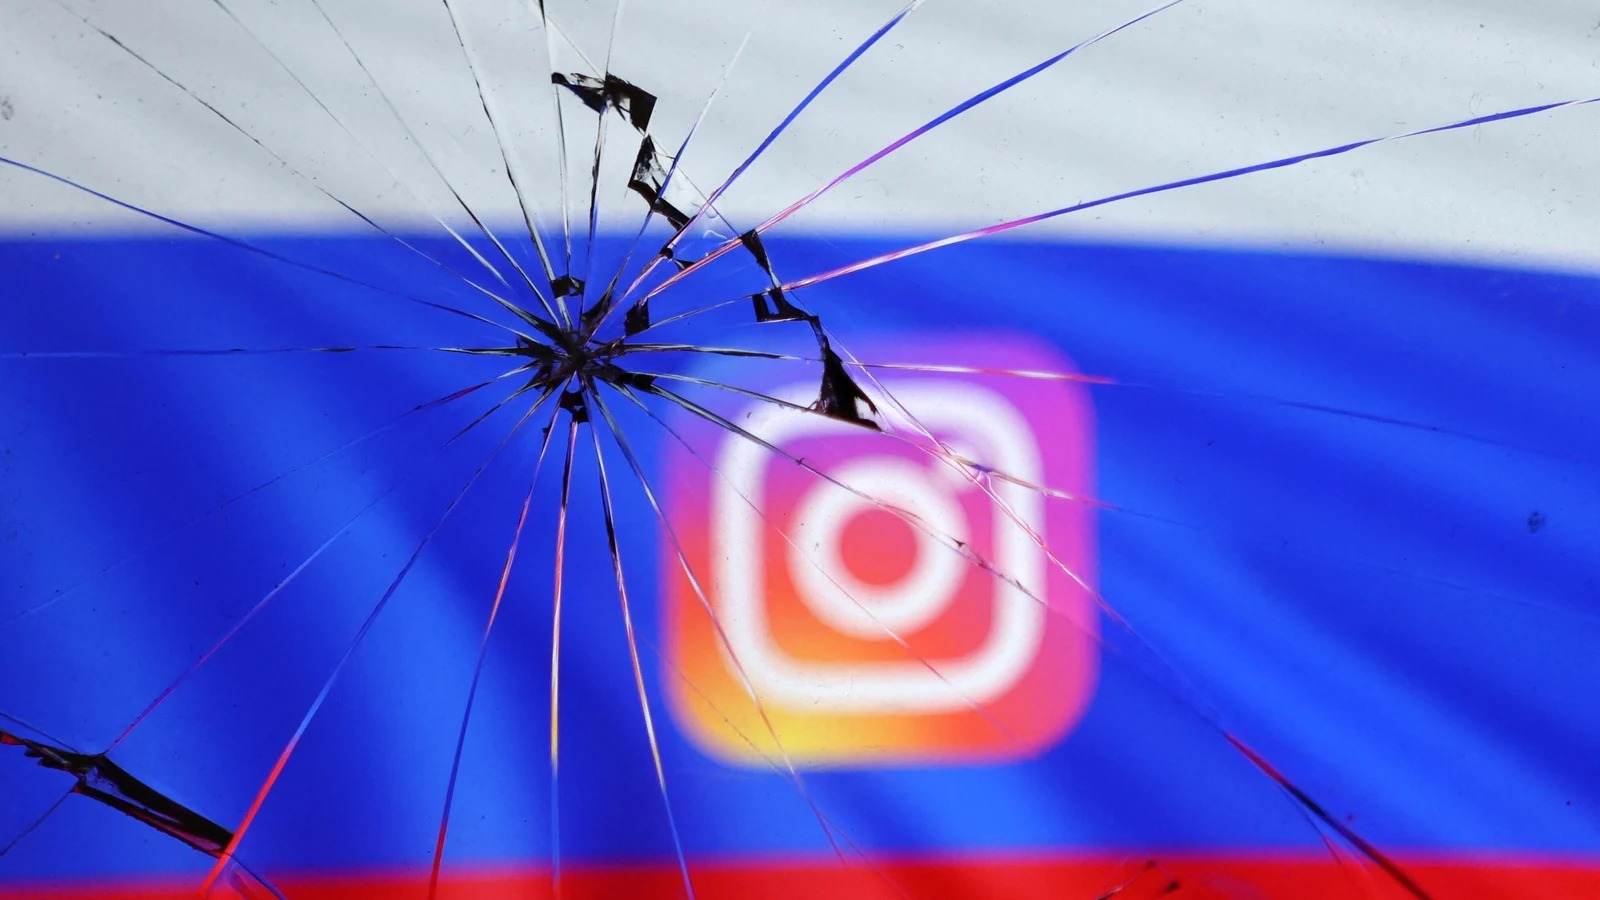 What is Rossgram: Russian Instagram to launch later this month